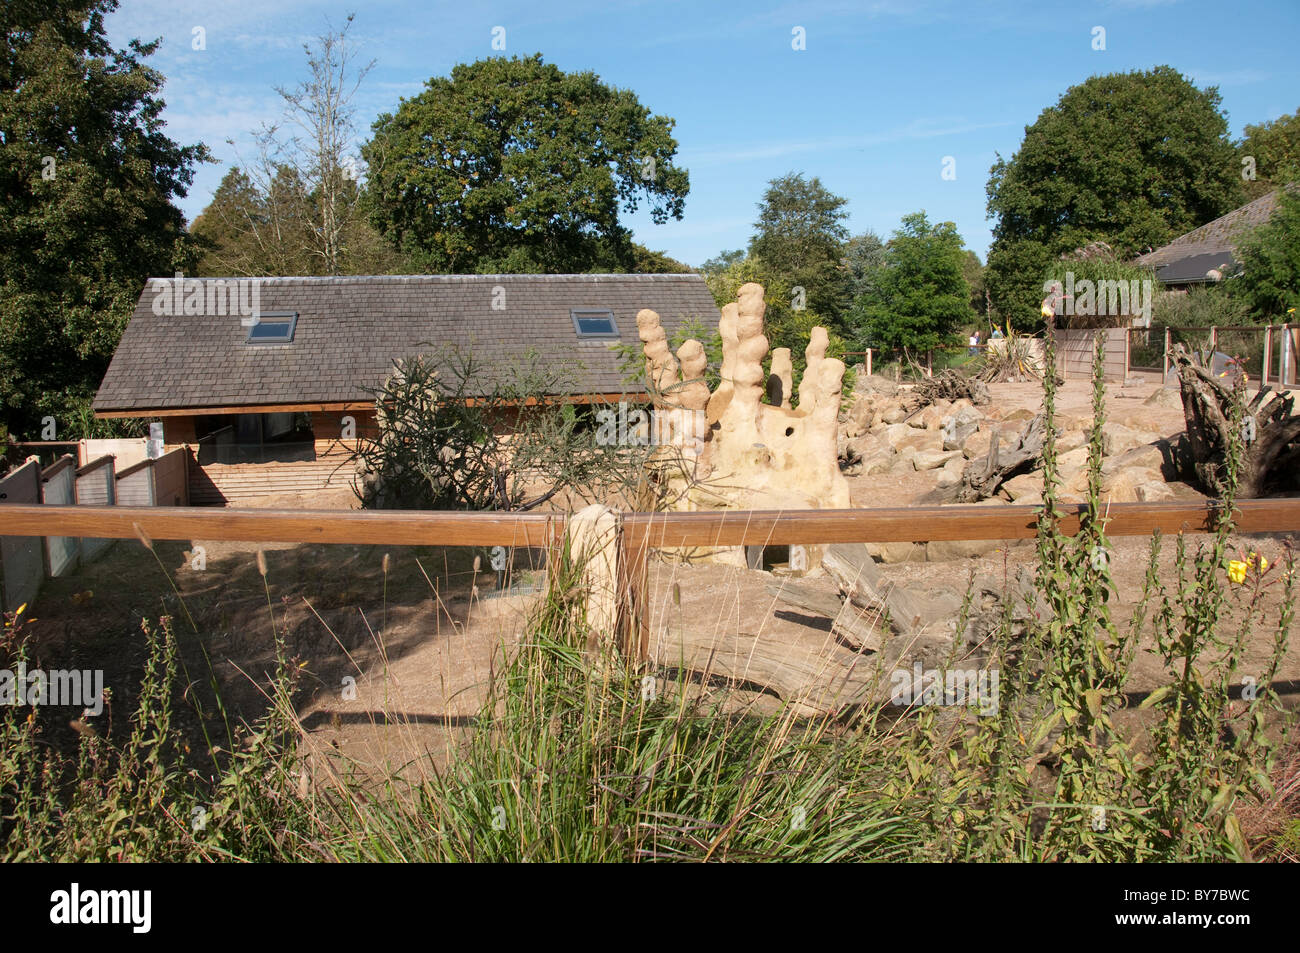 A part of Discovery Desert. The Meerkat enclosure at Jersey Zoo (Durrell Wildlife Conservation Trust) Stock Photo